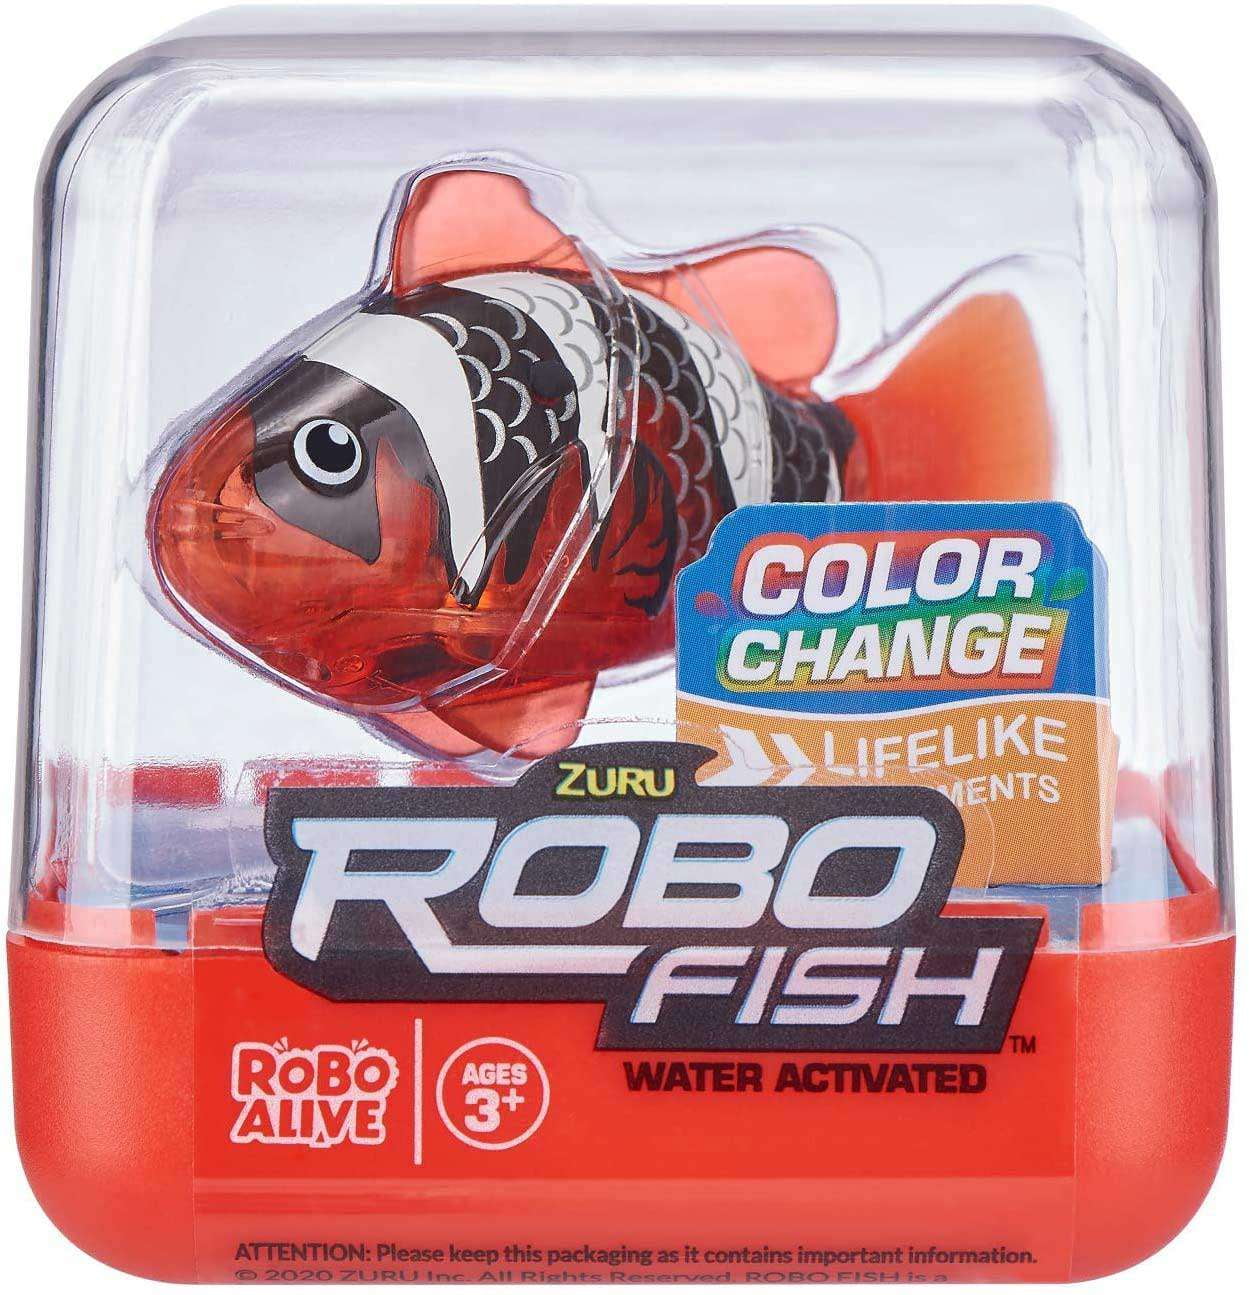 Zuru Robo Alive Robo Fish Changes Color Robotic Swimming Fish Water  Activated Series 3, Red